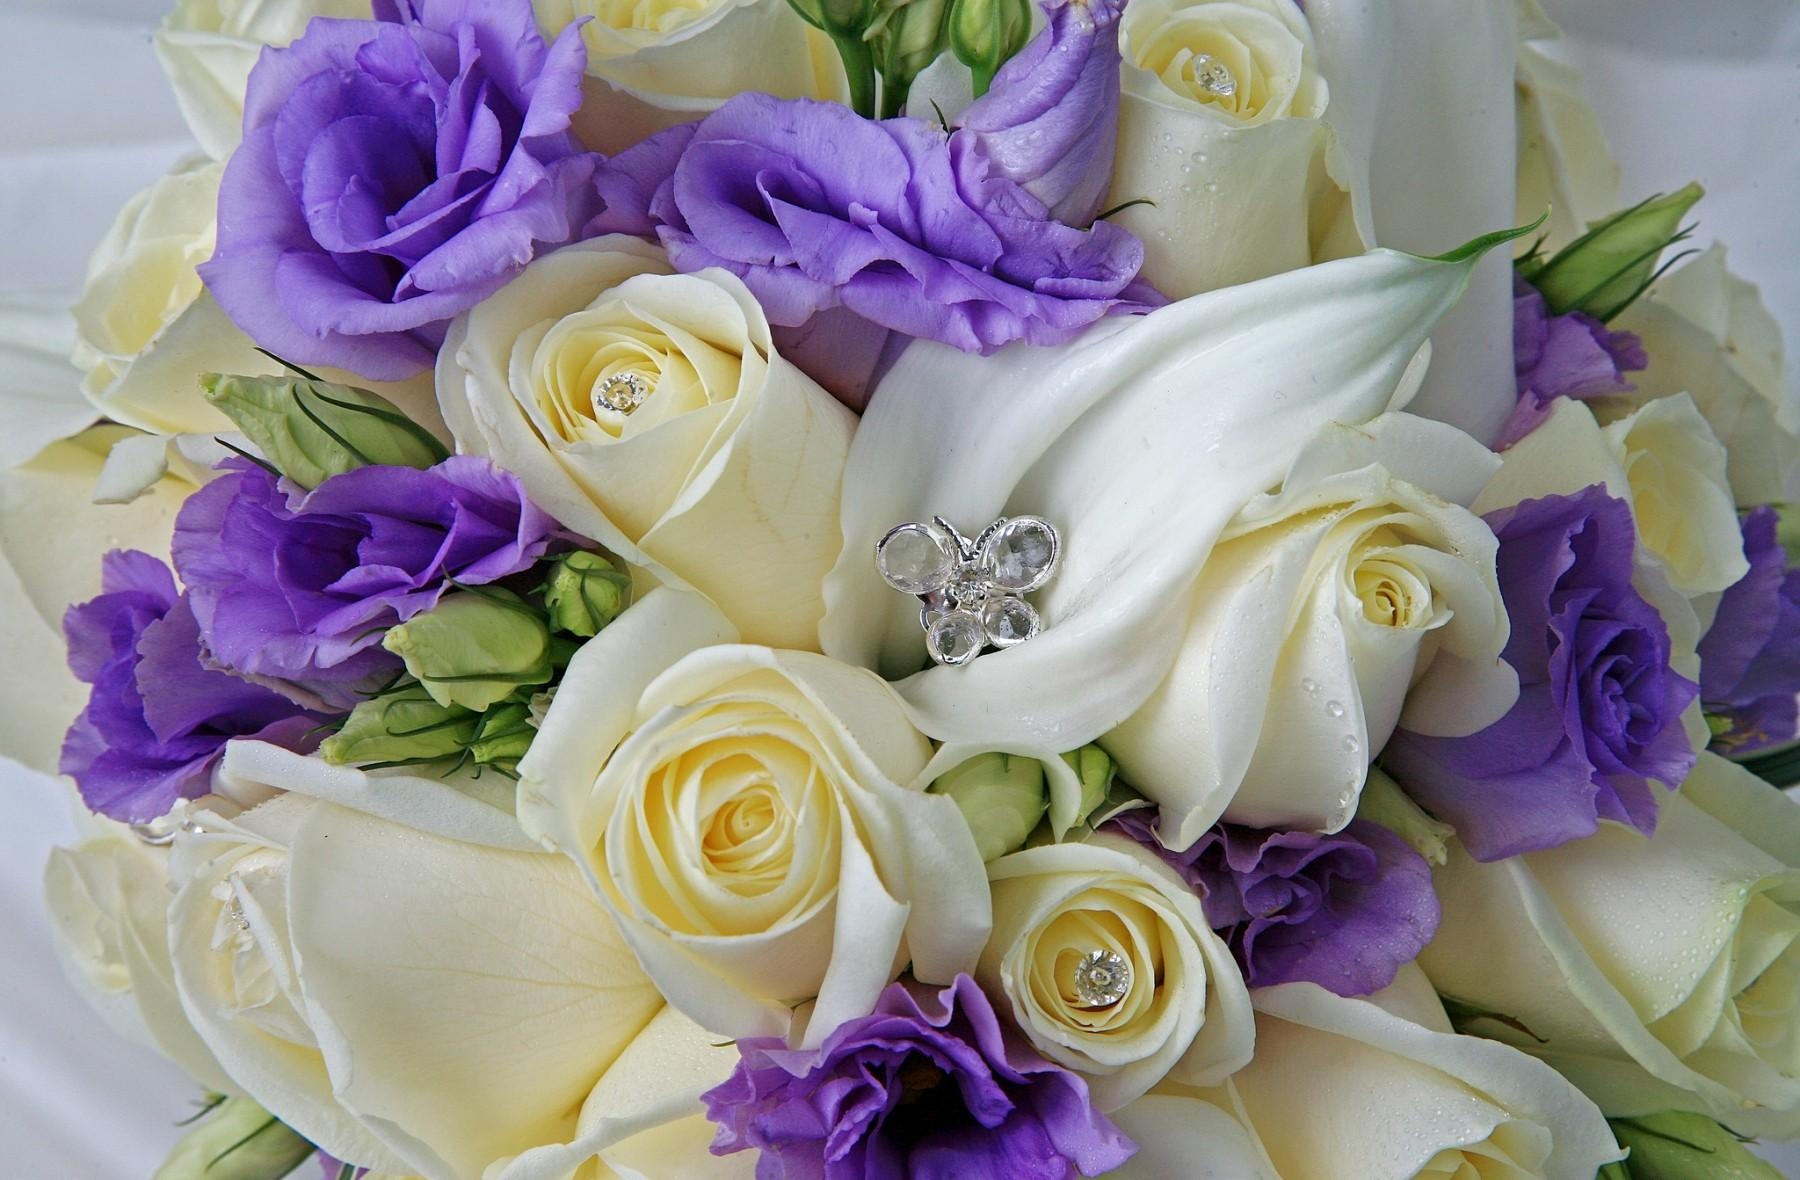 drops, roses, flowers, decorations, bouquet, lisianthus russell, lisiantus russell Full HD